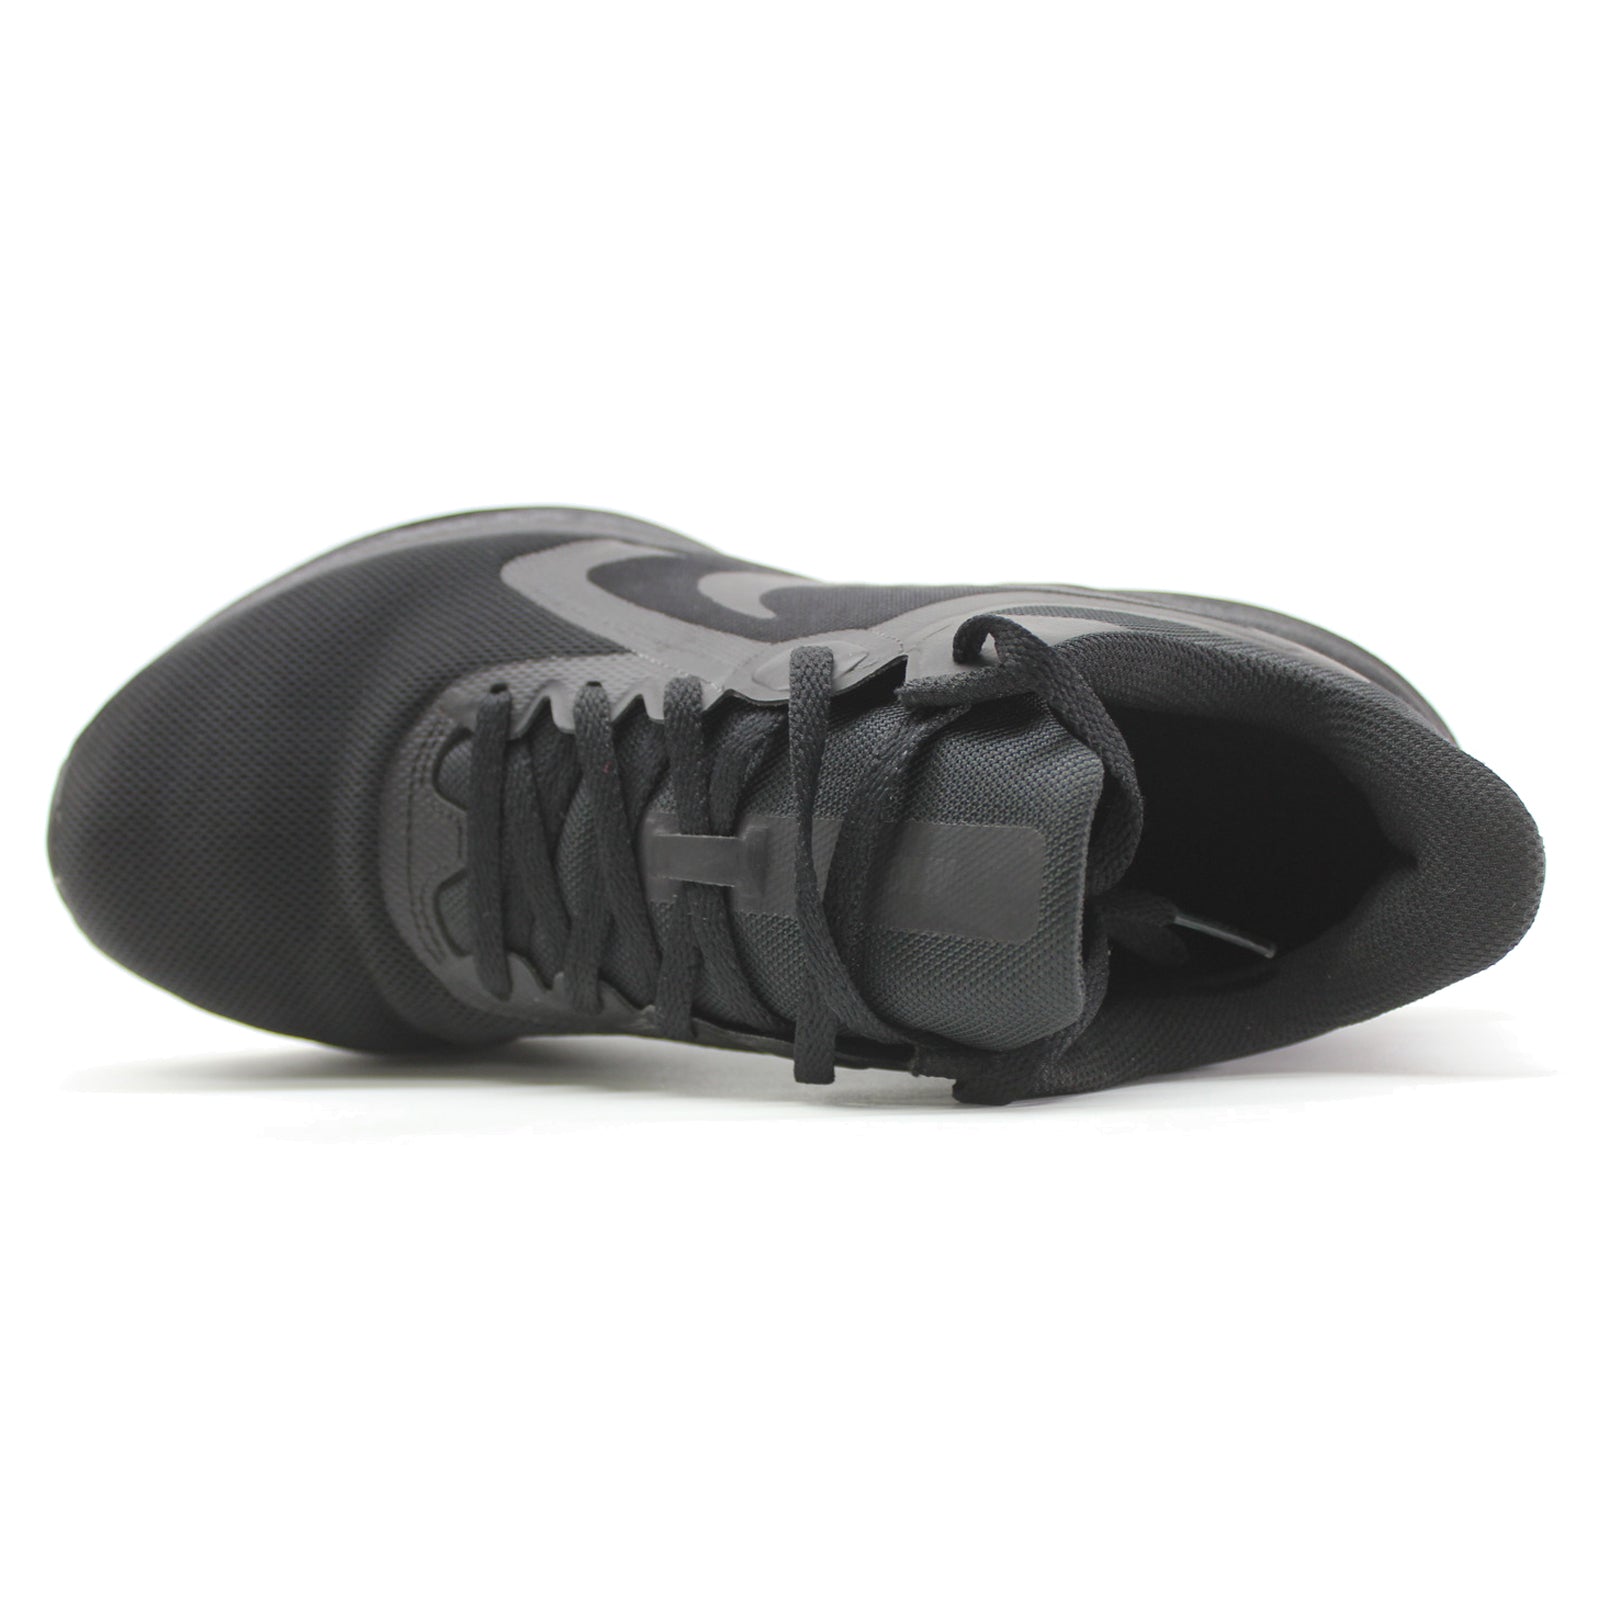 Nike Womens Downshifter 10 Synthetic Black Black Trainers - UK 5.5